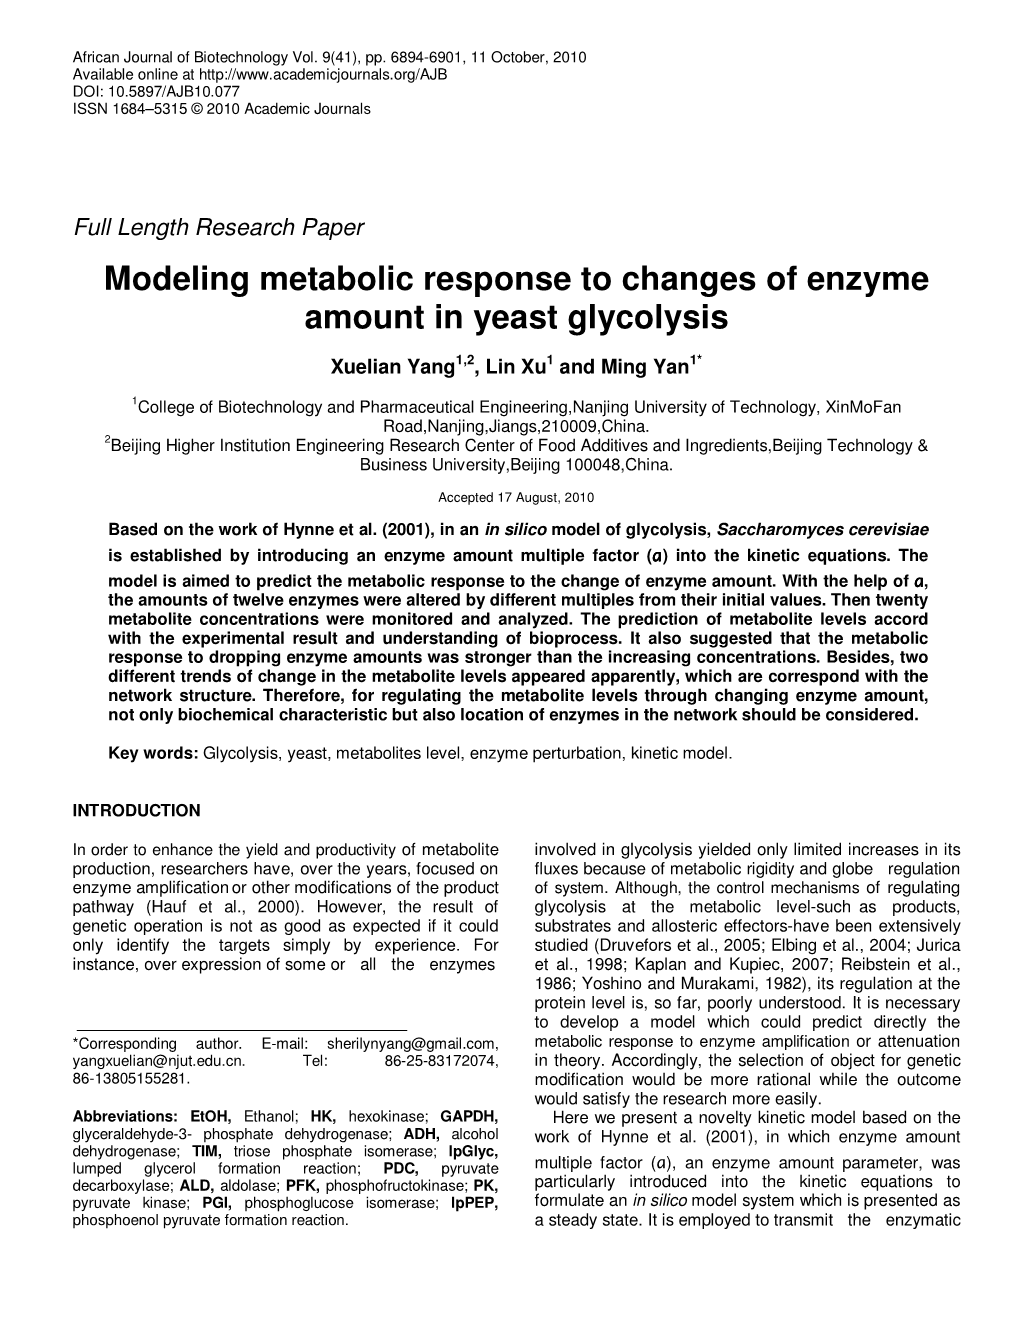 Modeling Metabolic Response to Changes of Enzyme Amount in Yeast Glycolysis